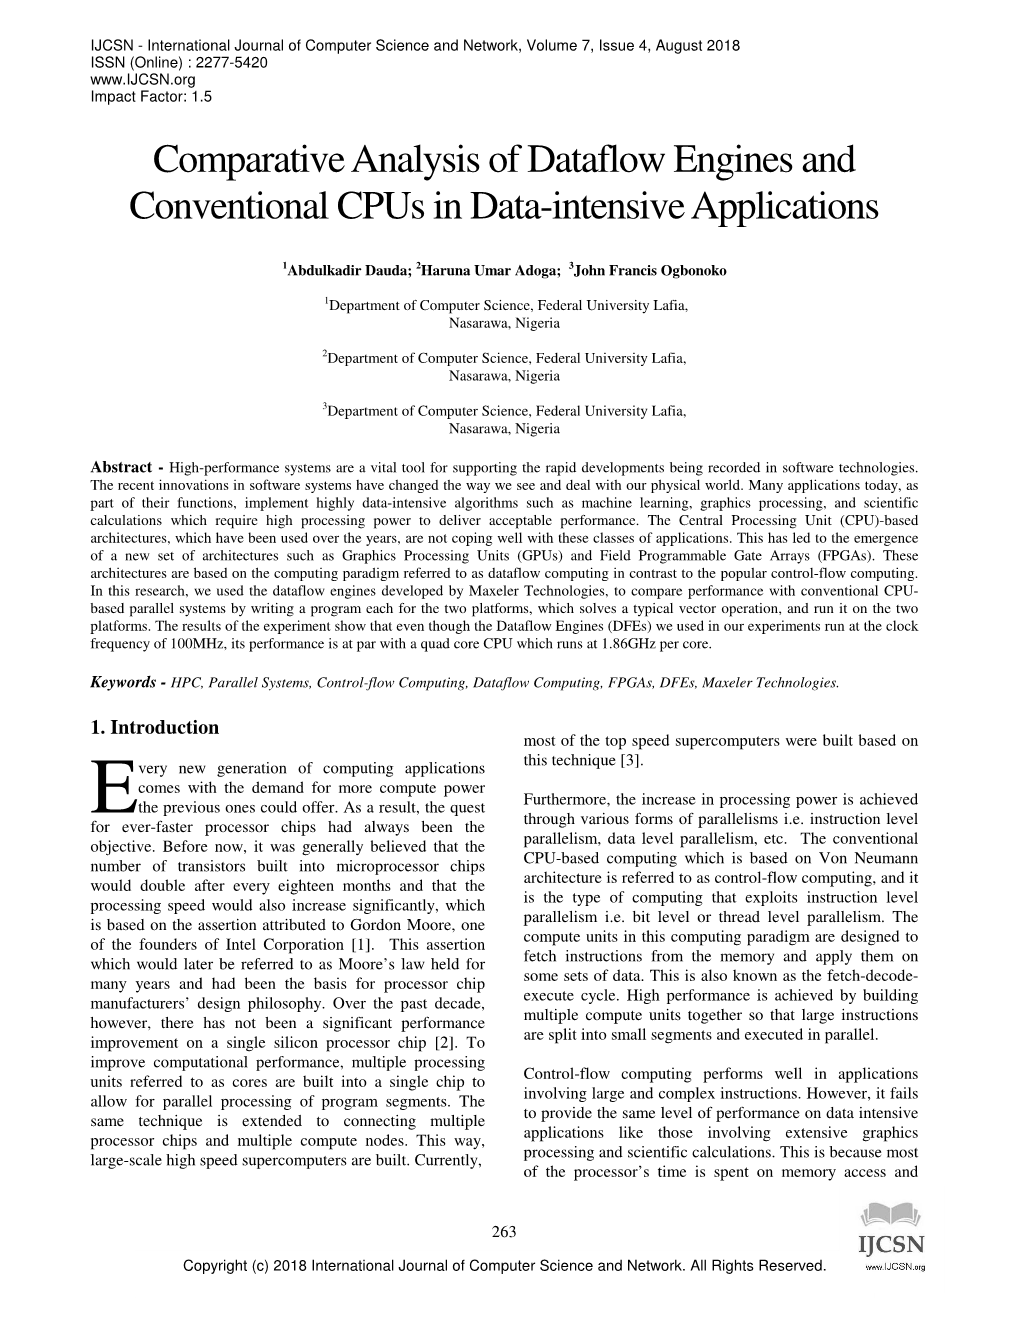 Comparative Analysis of Dataflow Engines and Conventional Cpus in Data-Intensive Applications